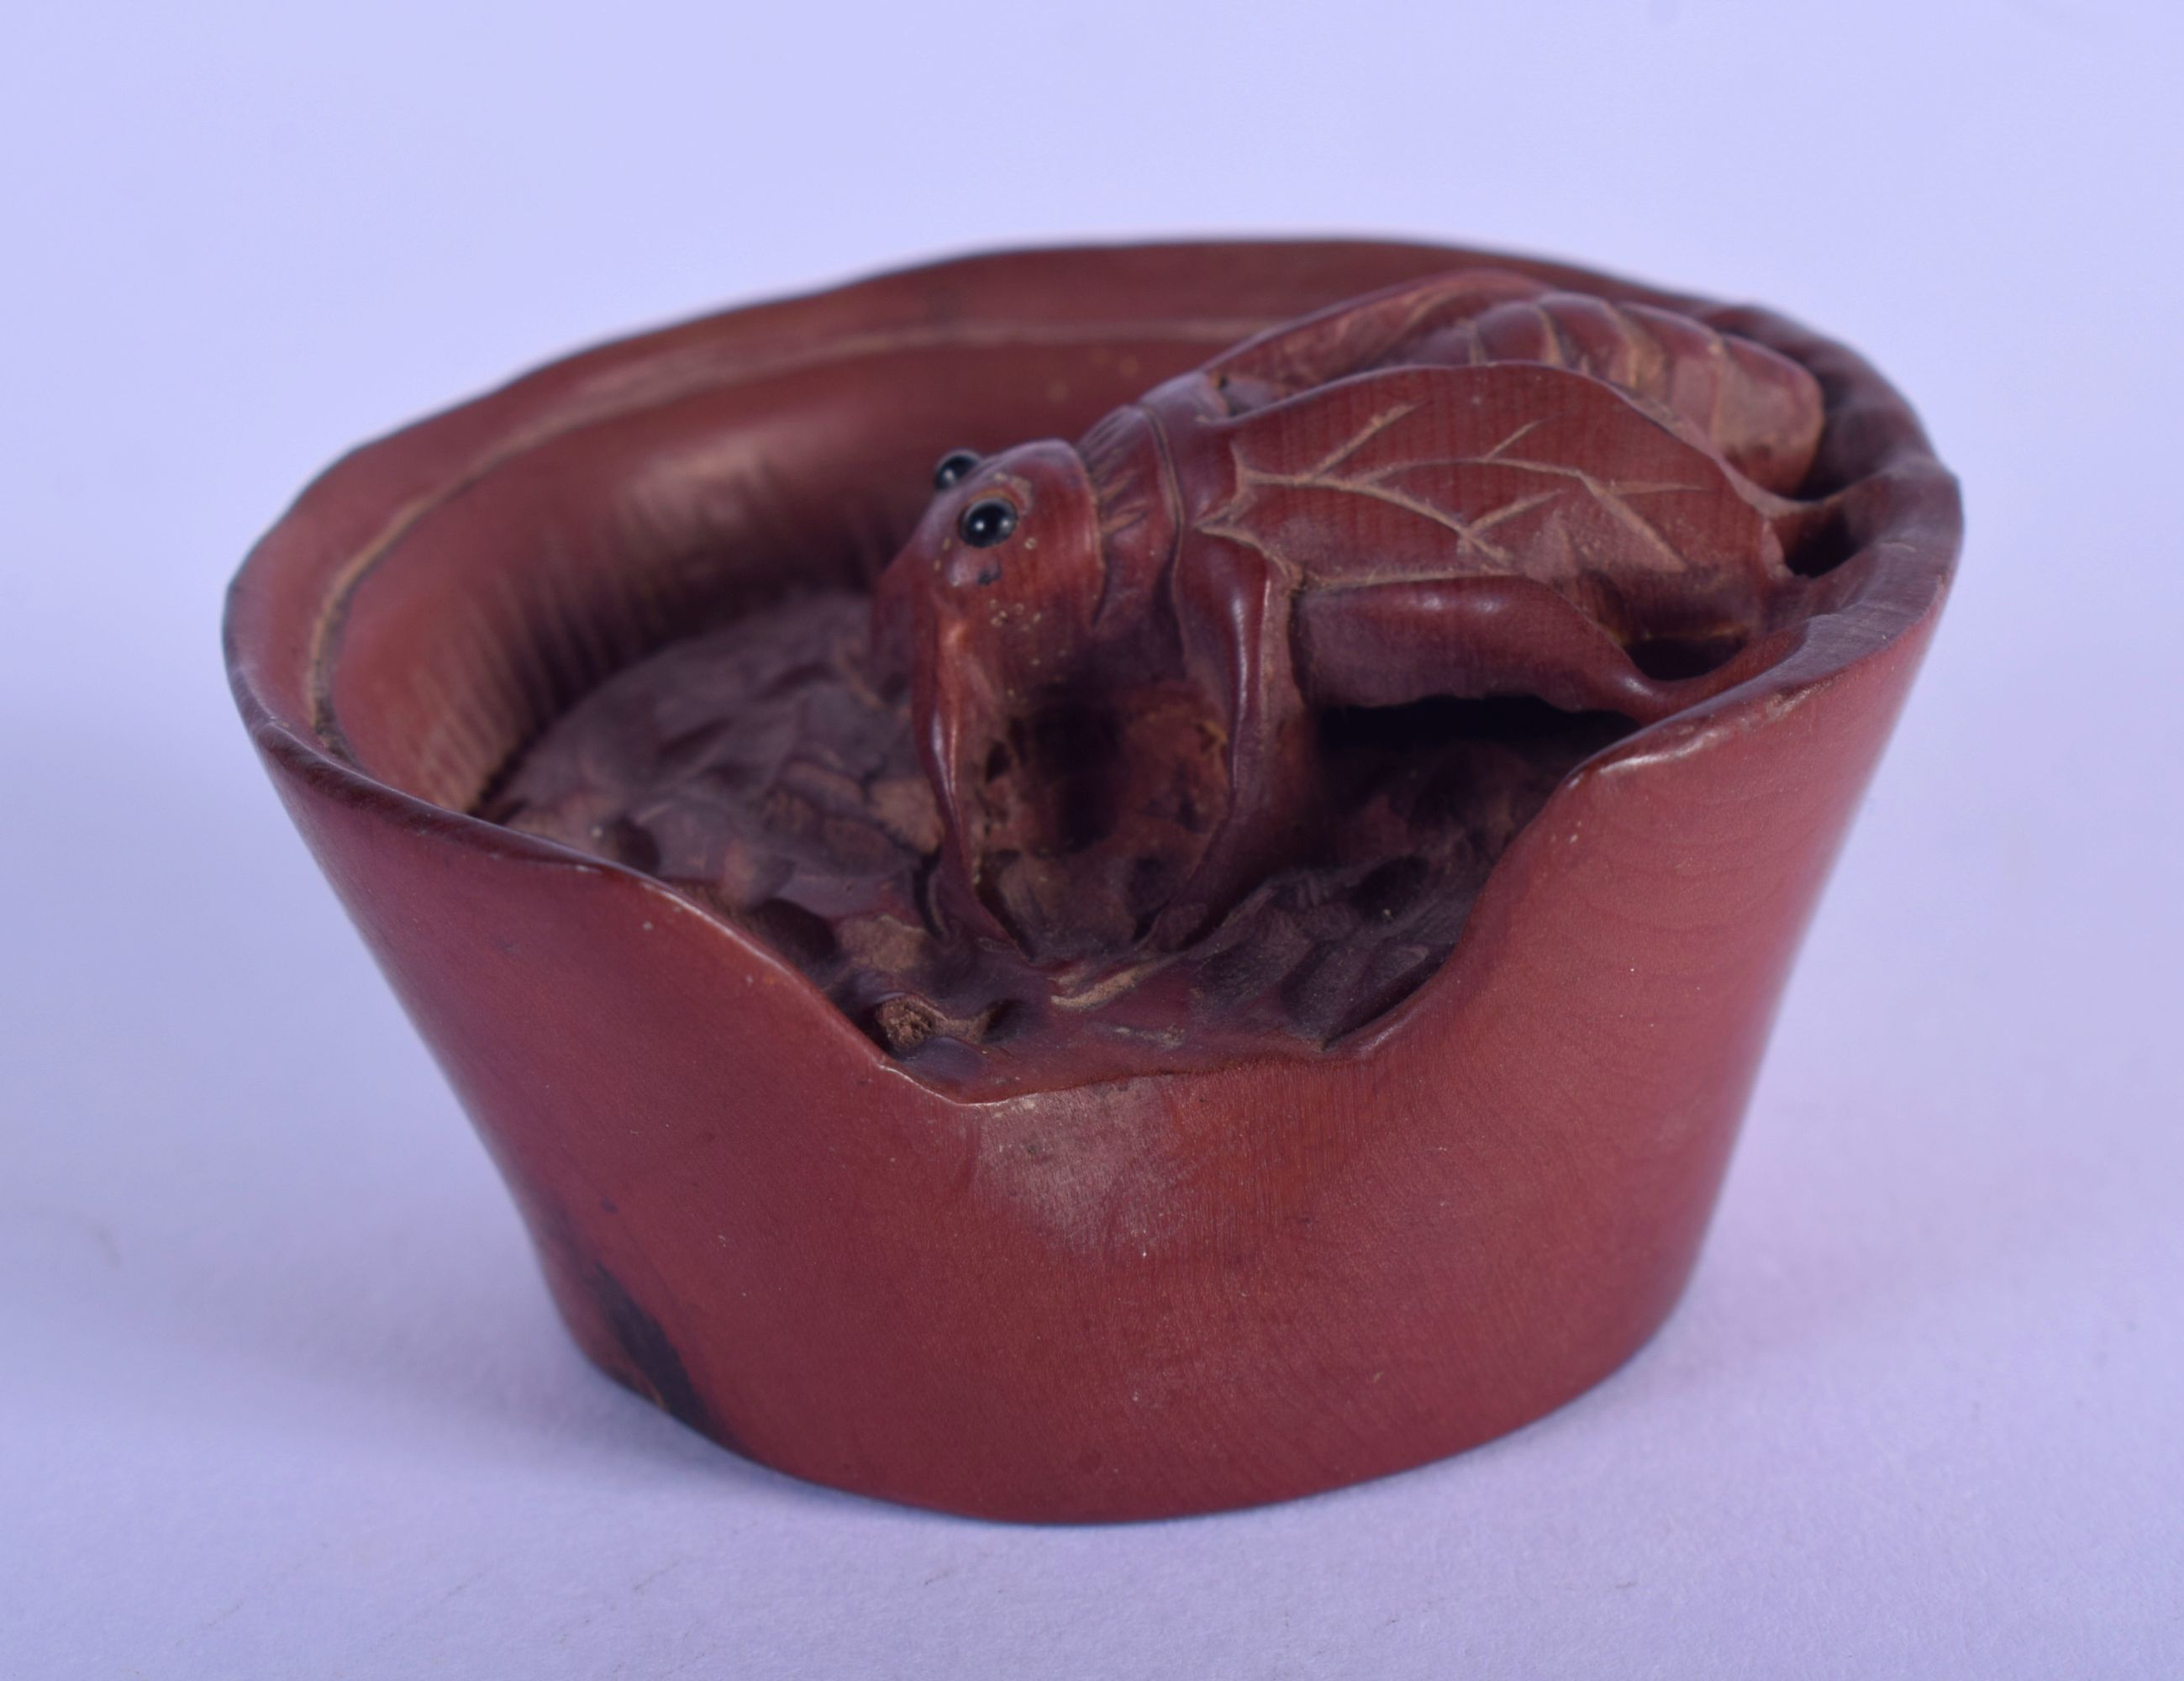 A JAPANESE BONE NETSUKE CARVED AS AN INSECT IN A BASKET. 4.7cm diameter, 2.5cm high, weight 21g